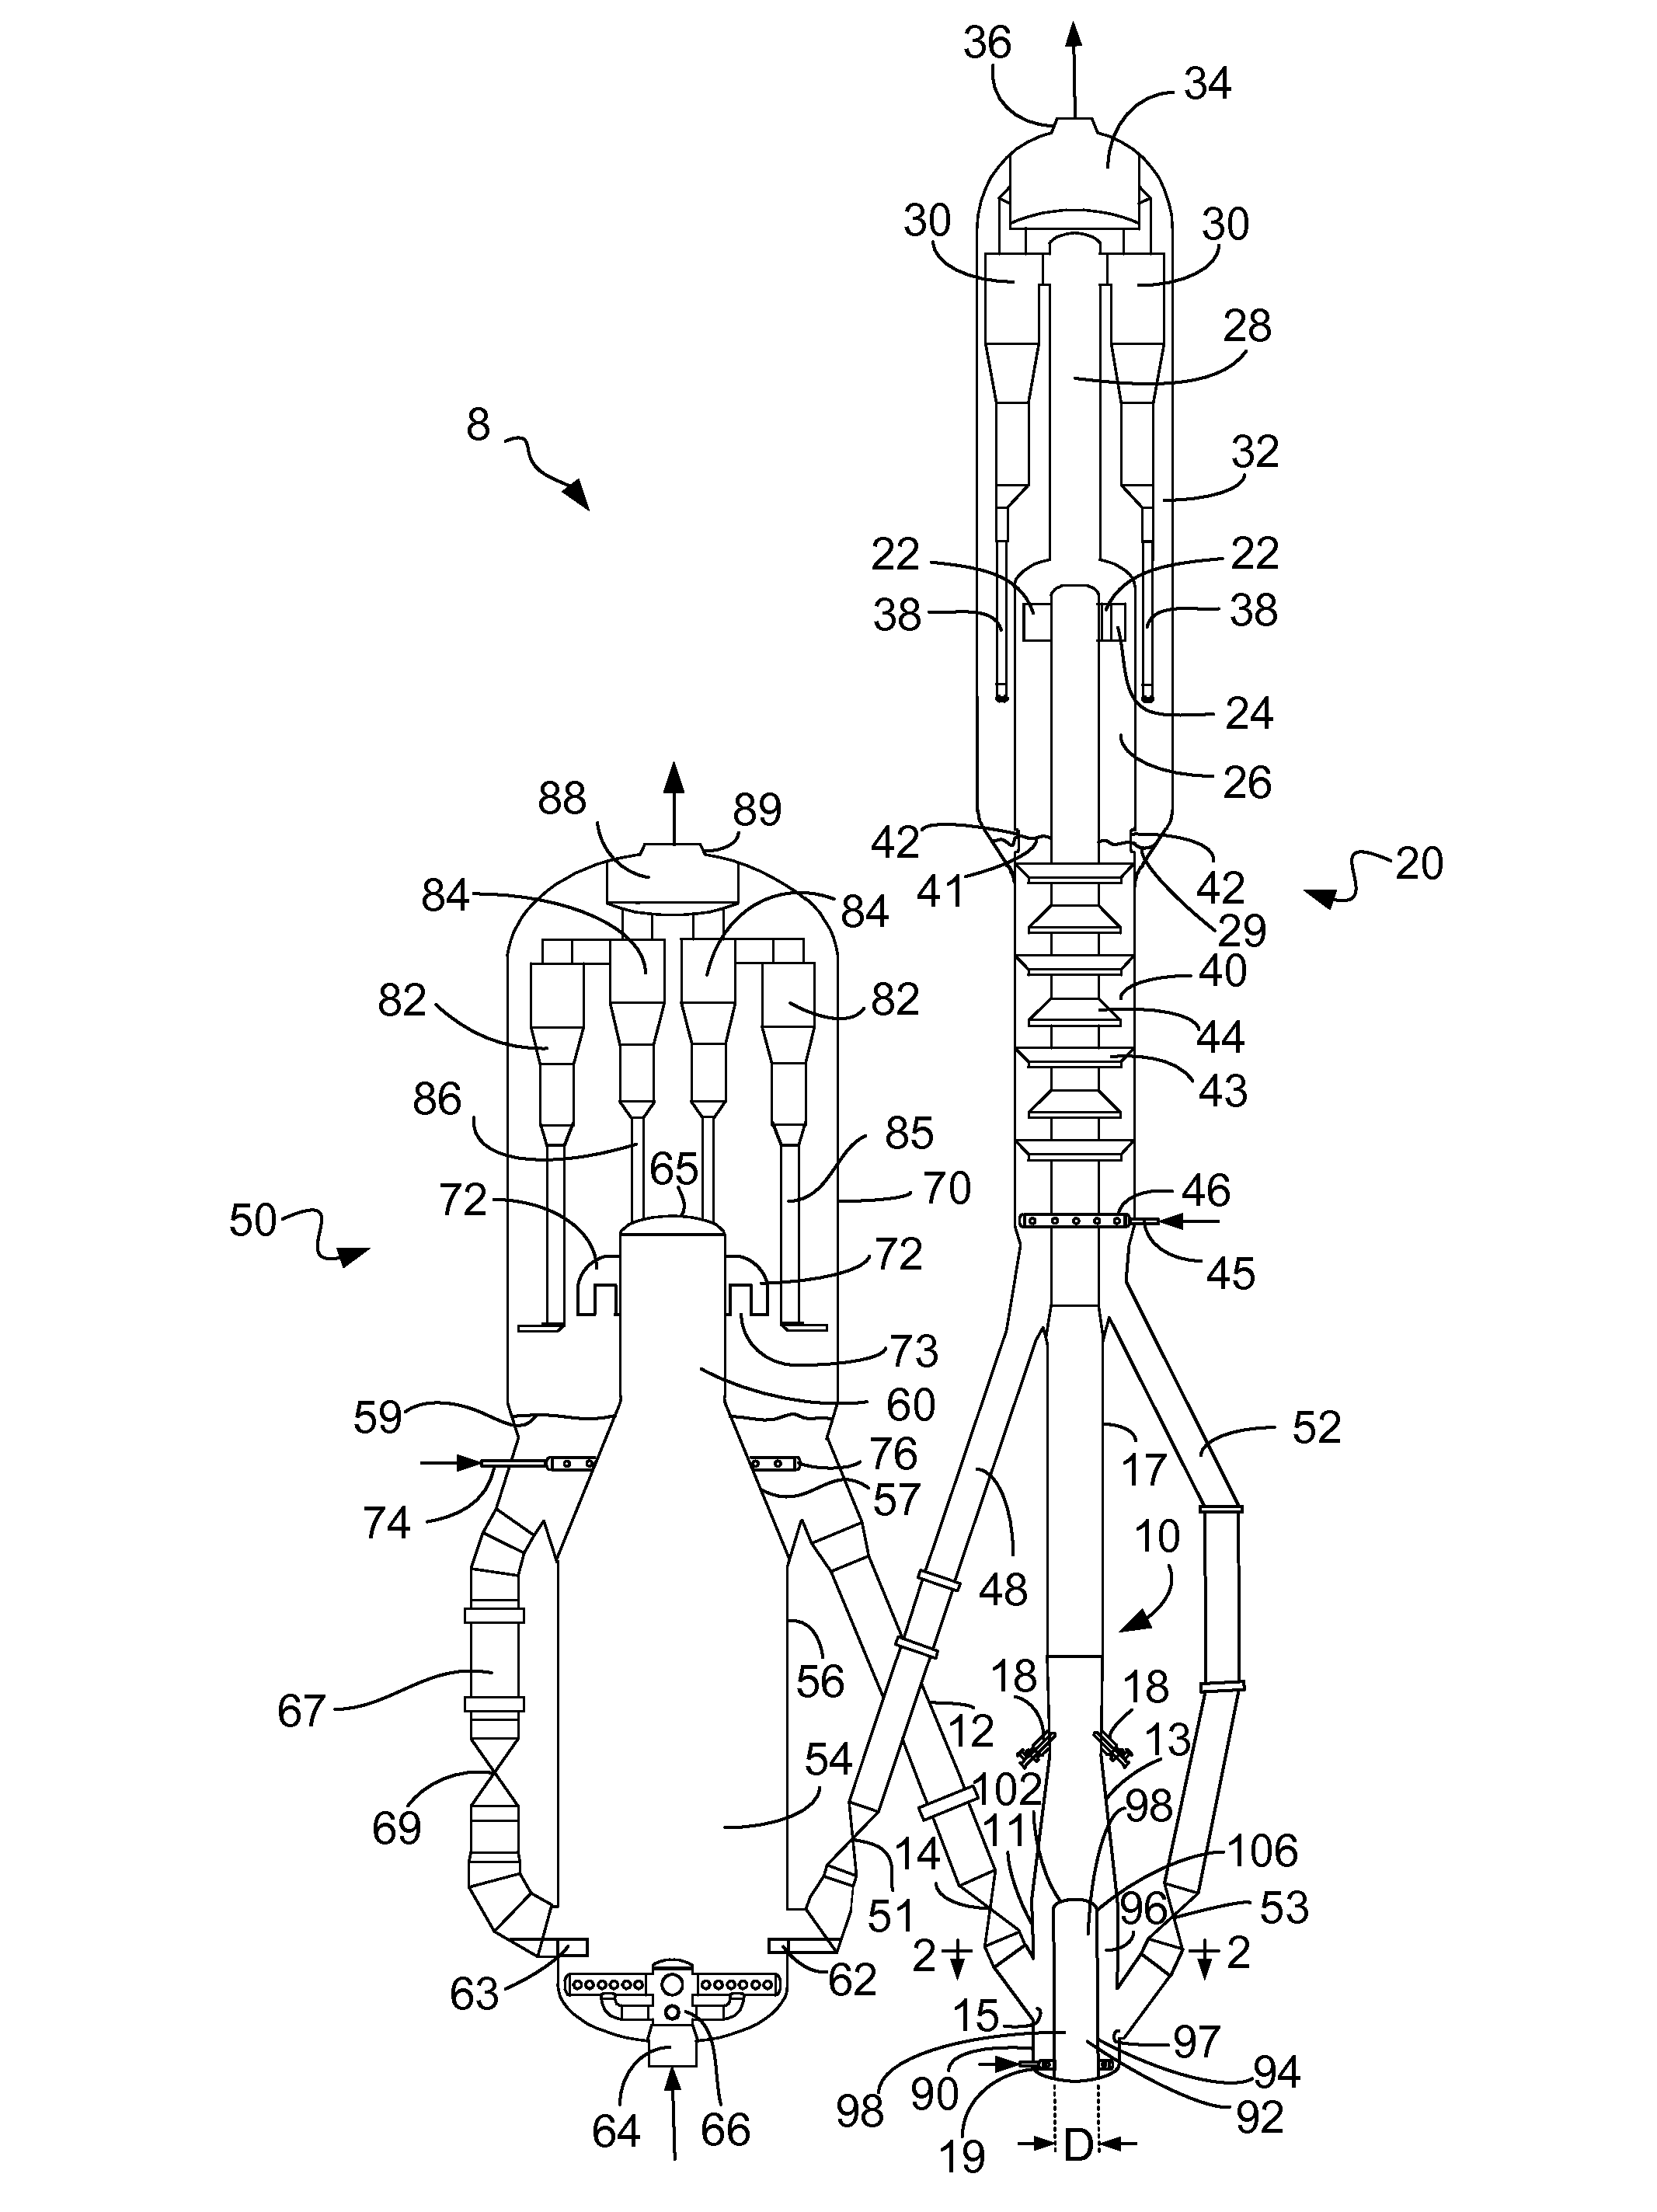 Process and apparatus for mixing two streams of catalyst